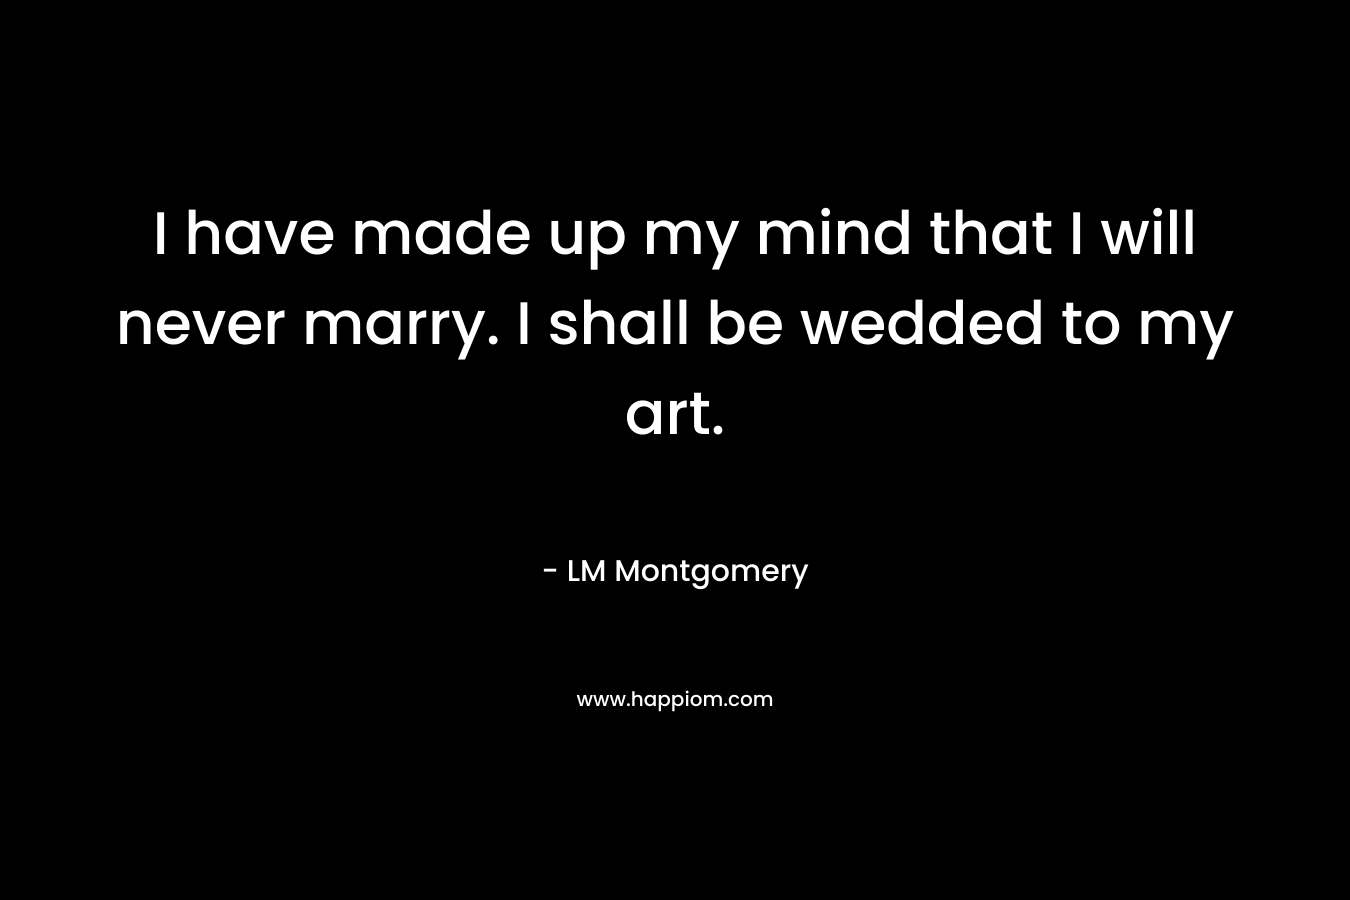 I have made up my mind that I will never marry. I shall be wedded to my art. – LM Montgomery